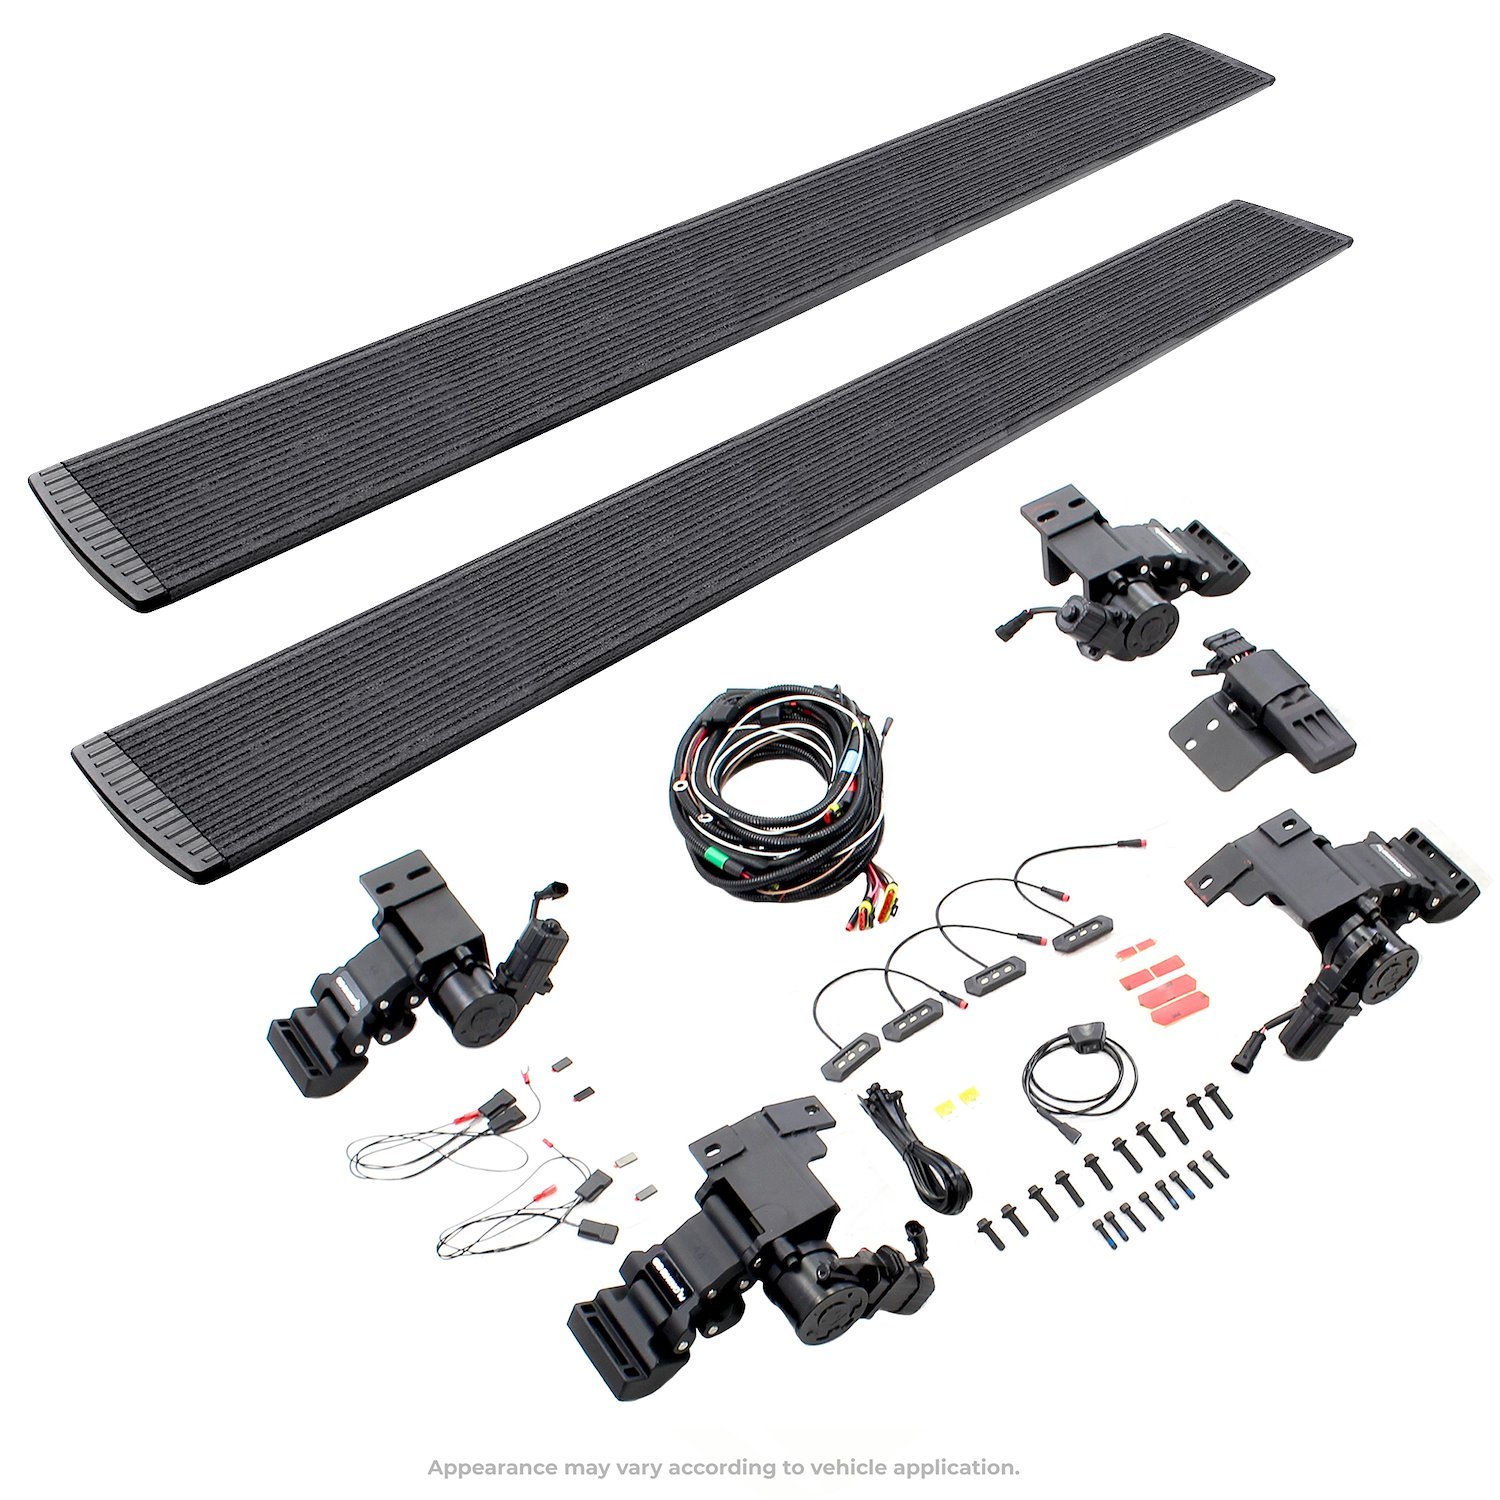 E1 Electric Running Board Kit Fits Select Ford F-350 Super Duty Crew Cab Pickup